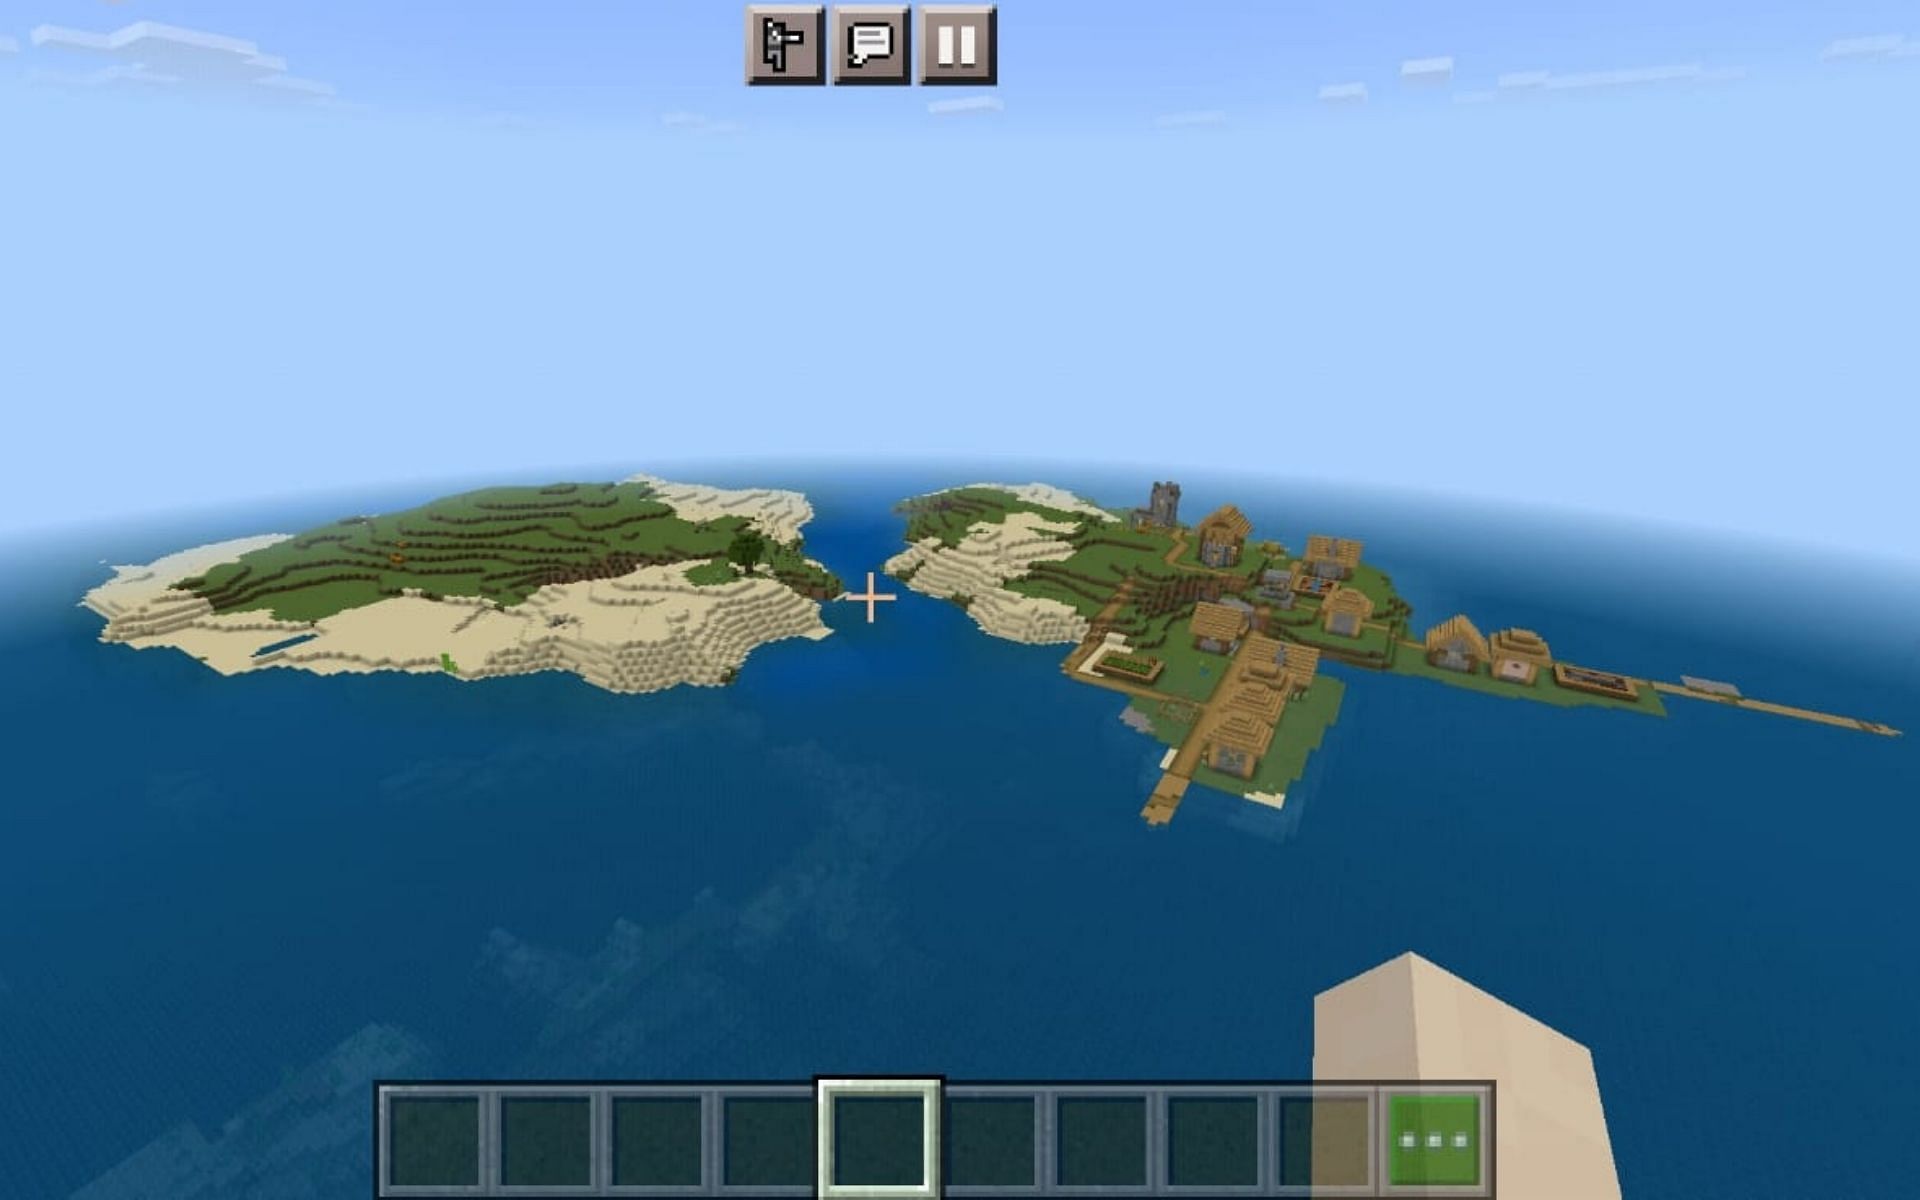 Cast away on an island with a village (Image via Minecraft)